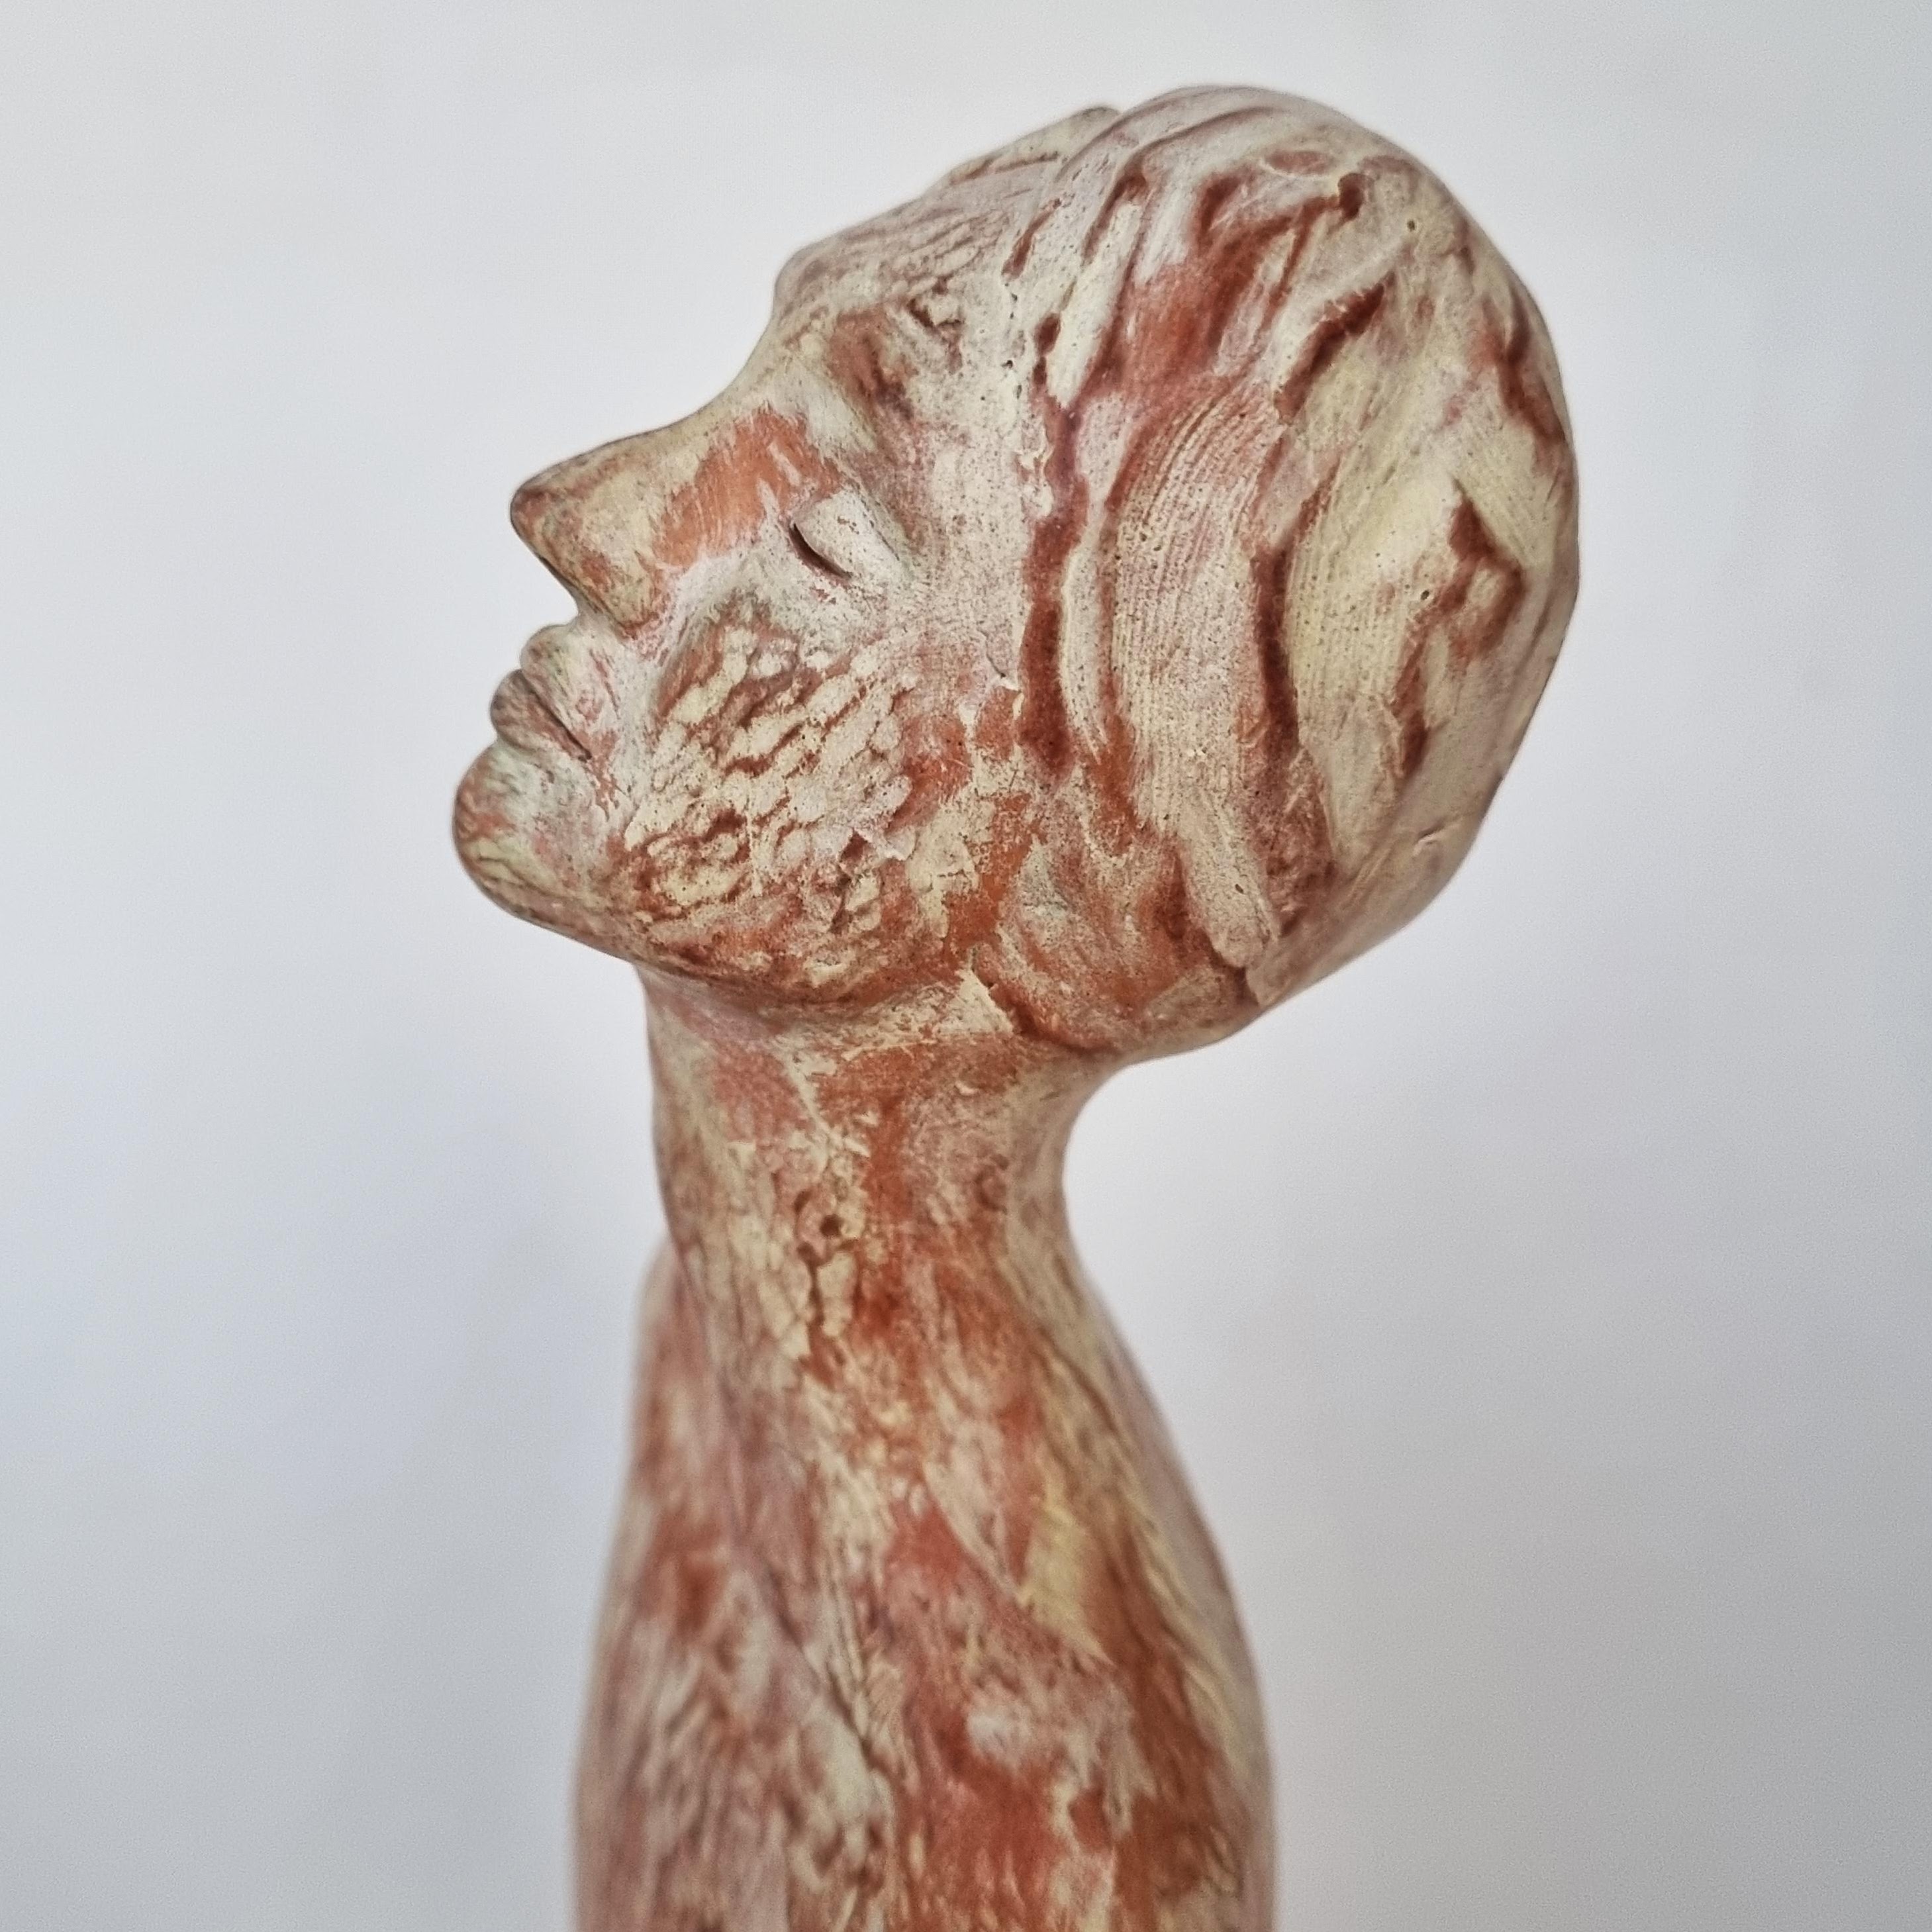 Ceramic figurative sculpture of woman praying. Red clay with pale yellow slip, carved and burnished pottery art